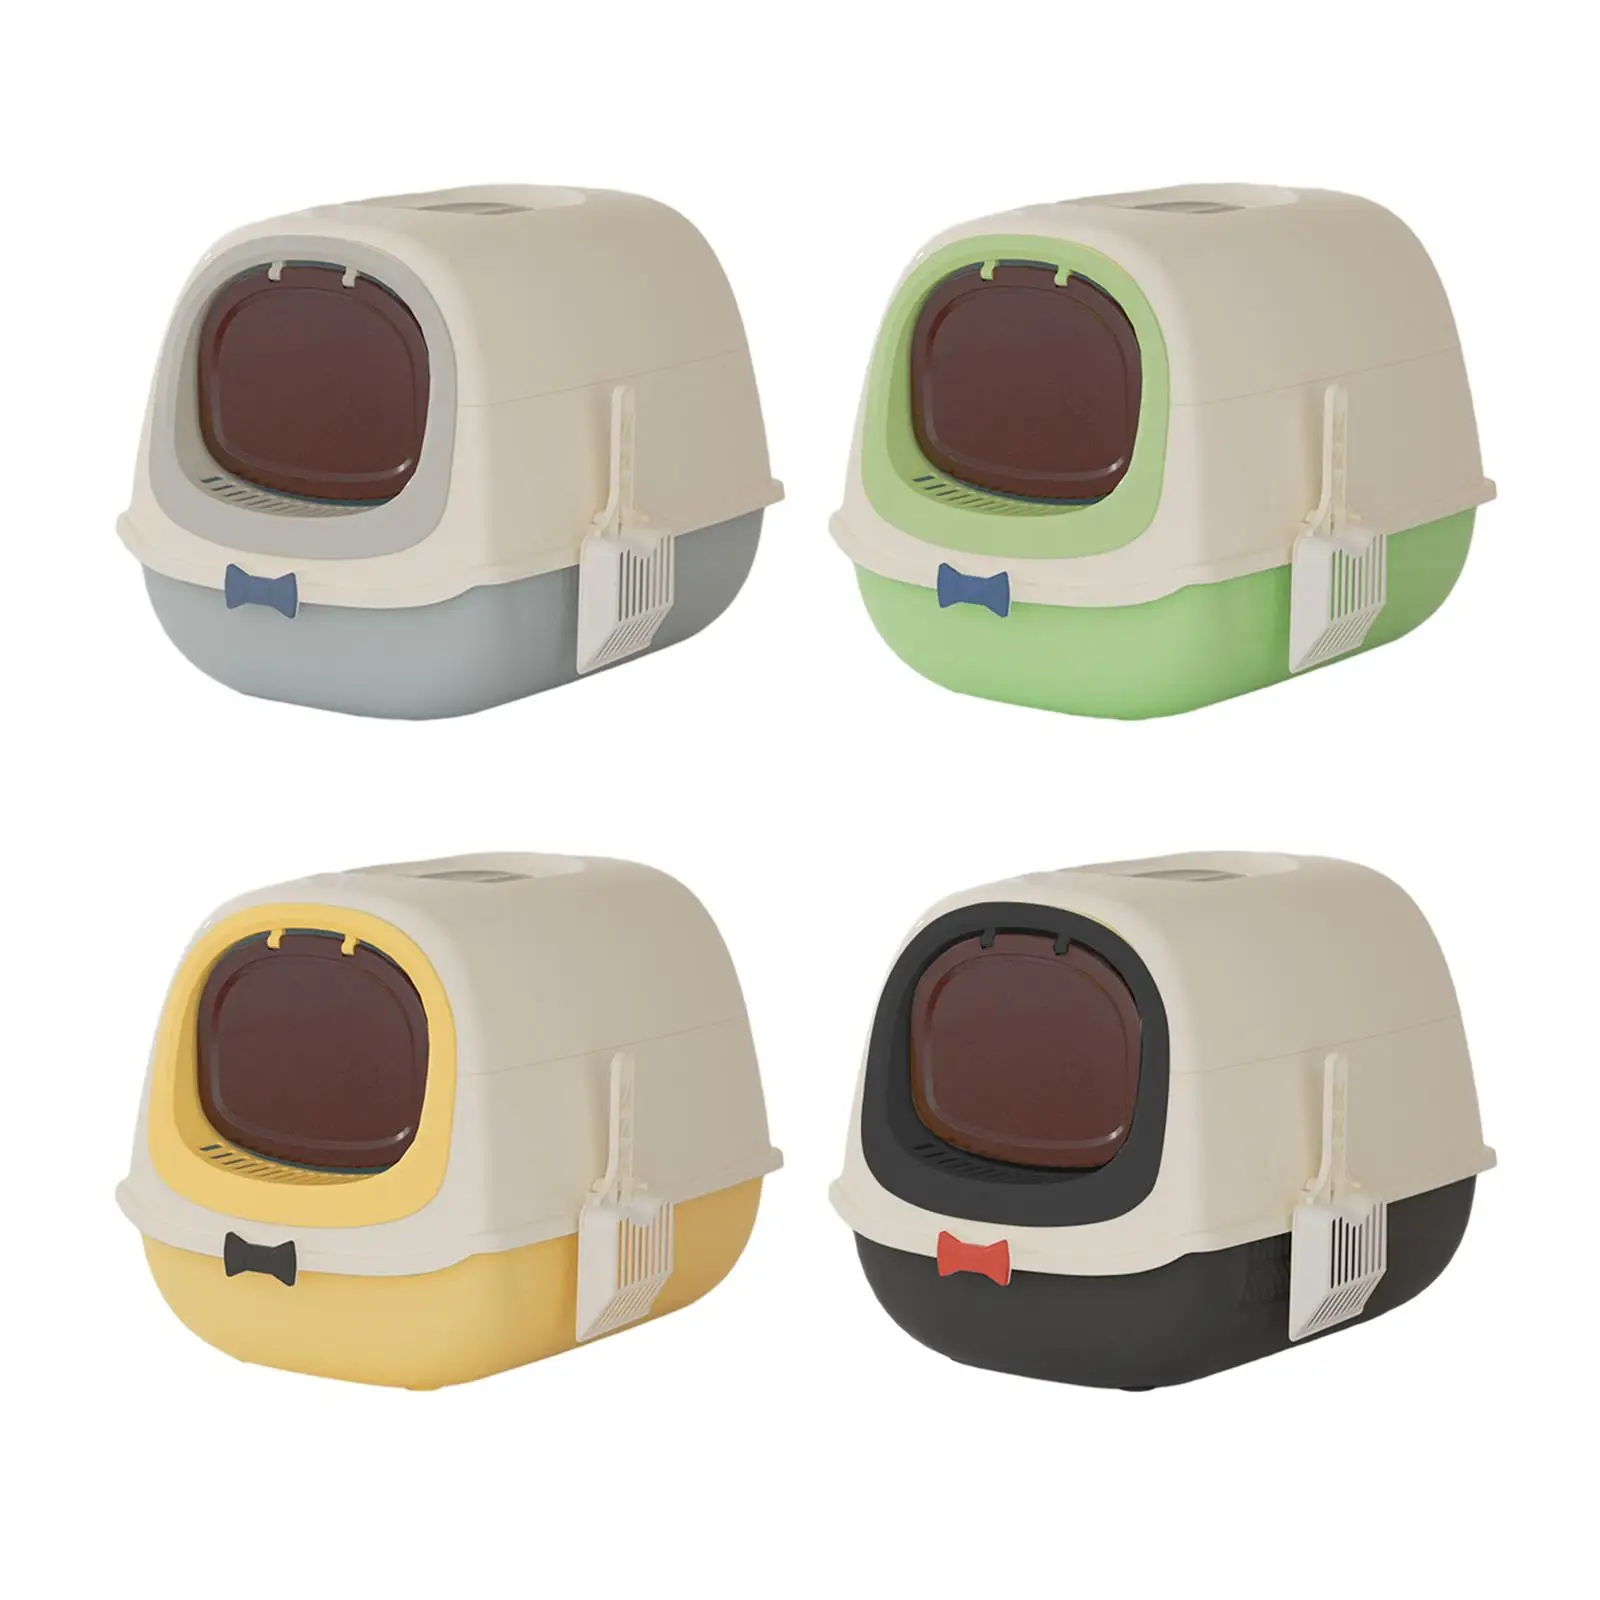 Hooded Cat Litter Box Pet Supplies Durable Detachable Easy to Clean Enclosed Cat Toilet Cat Litter Tray Kitty Litter Pan